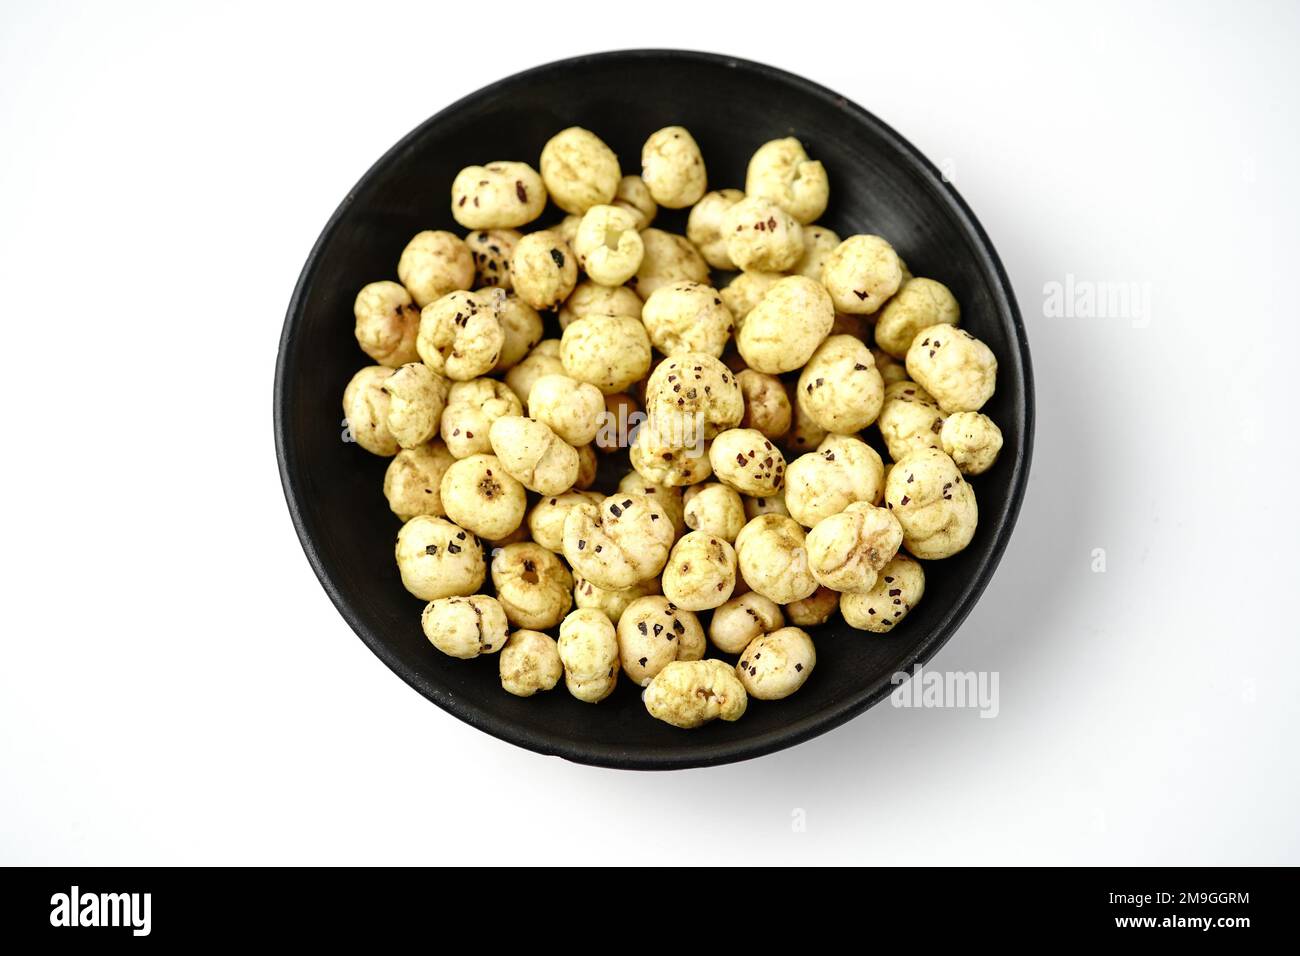 Makhana, also called as Lotus Seeds or Fox Nuts are popular dry snacks from India, served in a bowl Stock Photo